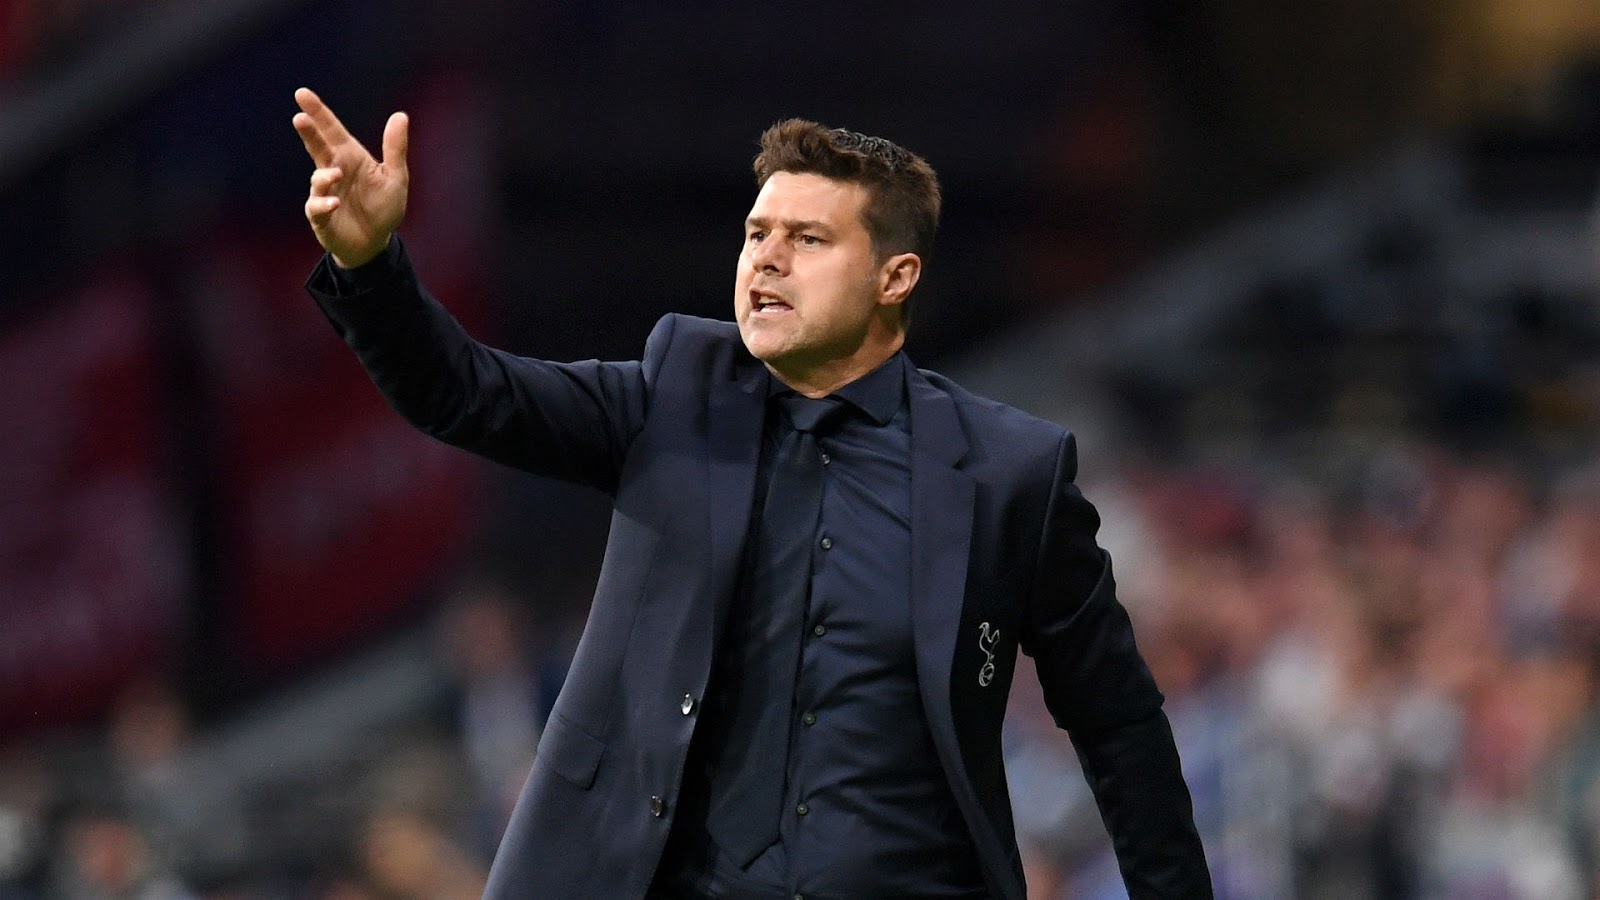 MAURICIO POCHETTINO REMAINS COMMITTED TO CHELSEA